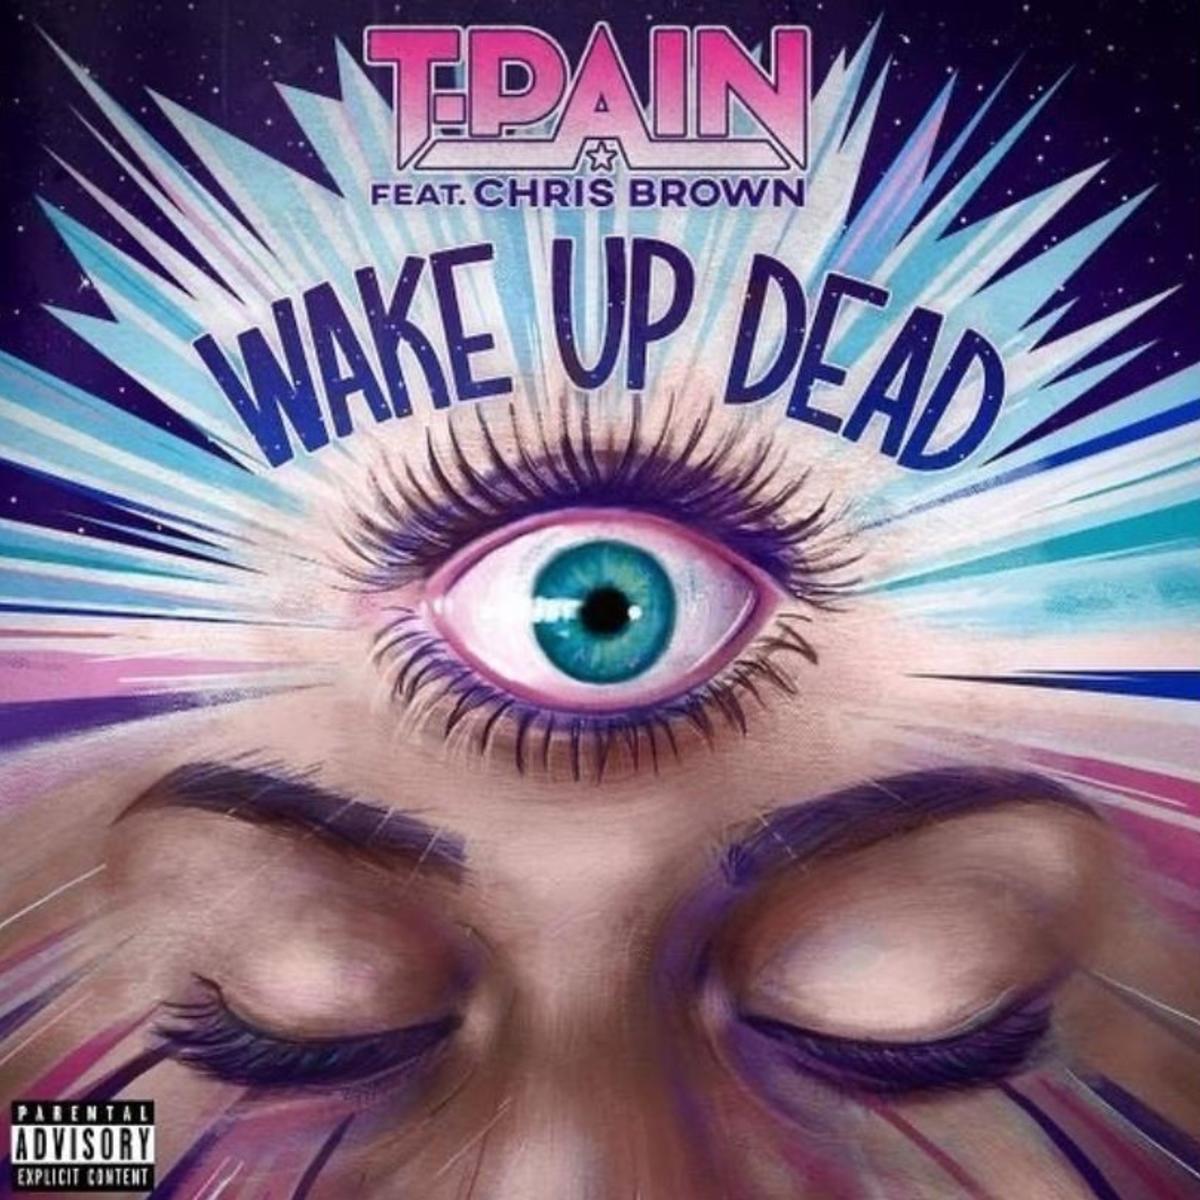 T-Pain & Chris Brown Reunite For “Wake Up Dead”